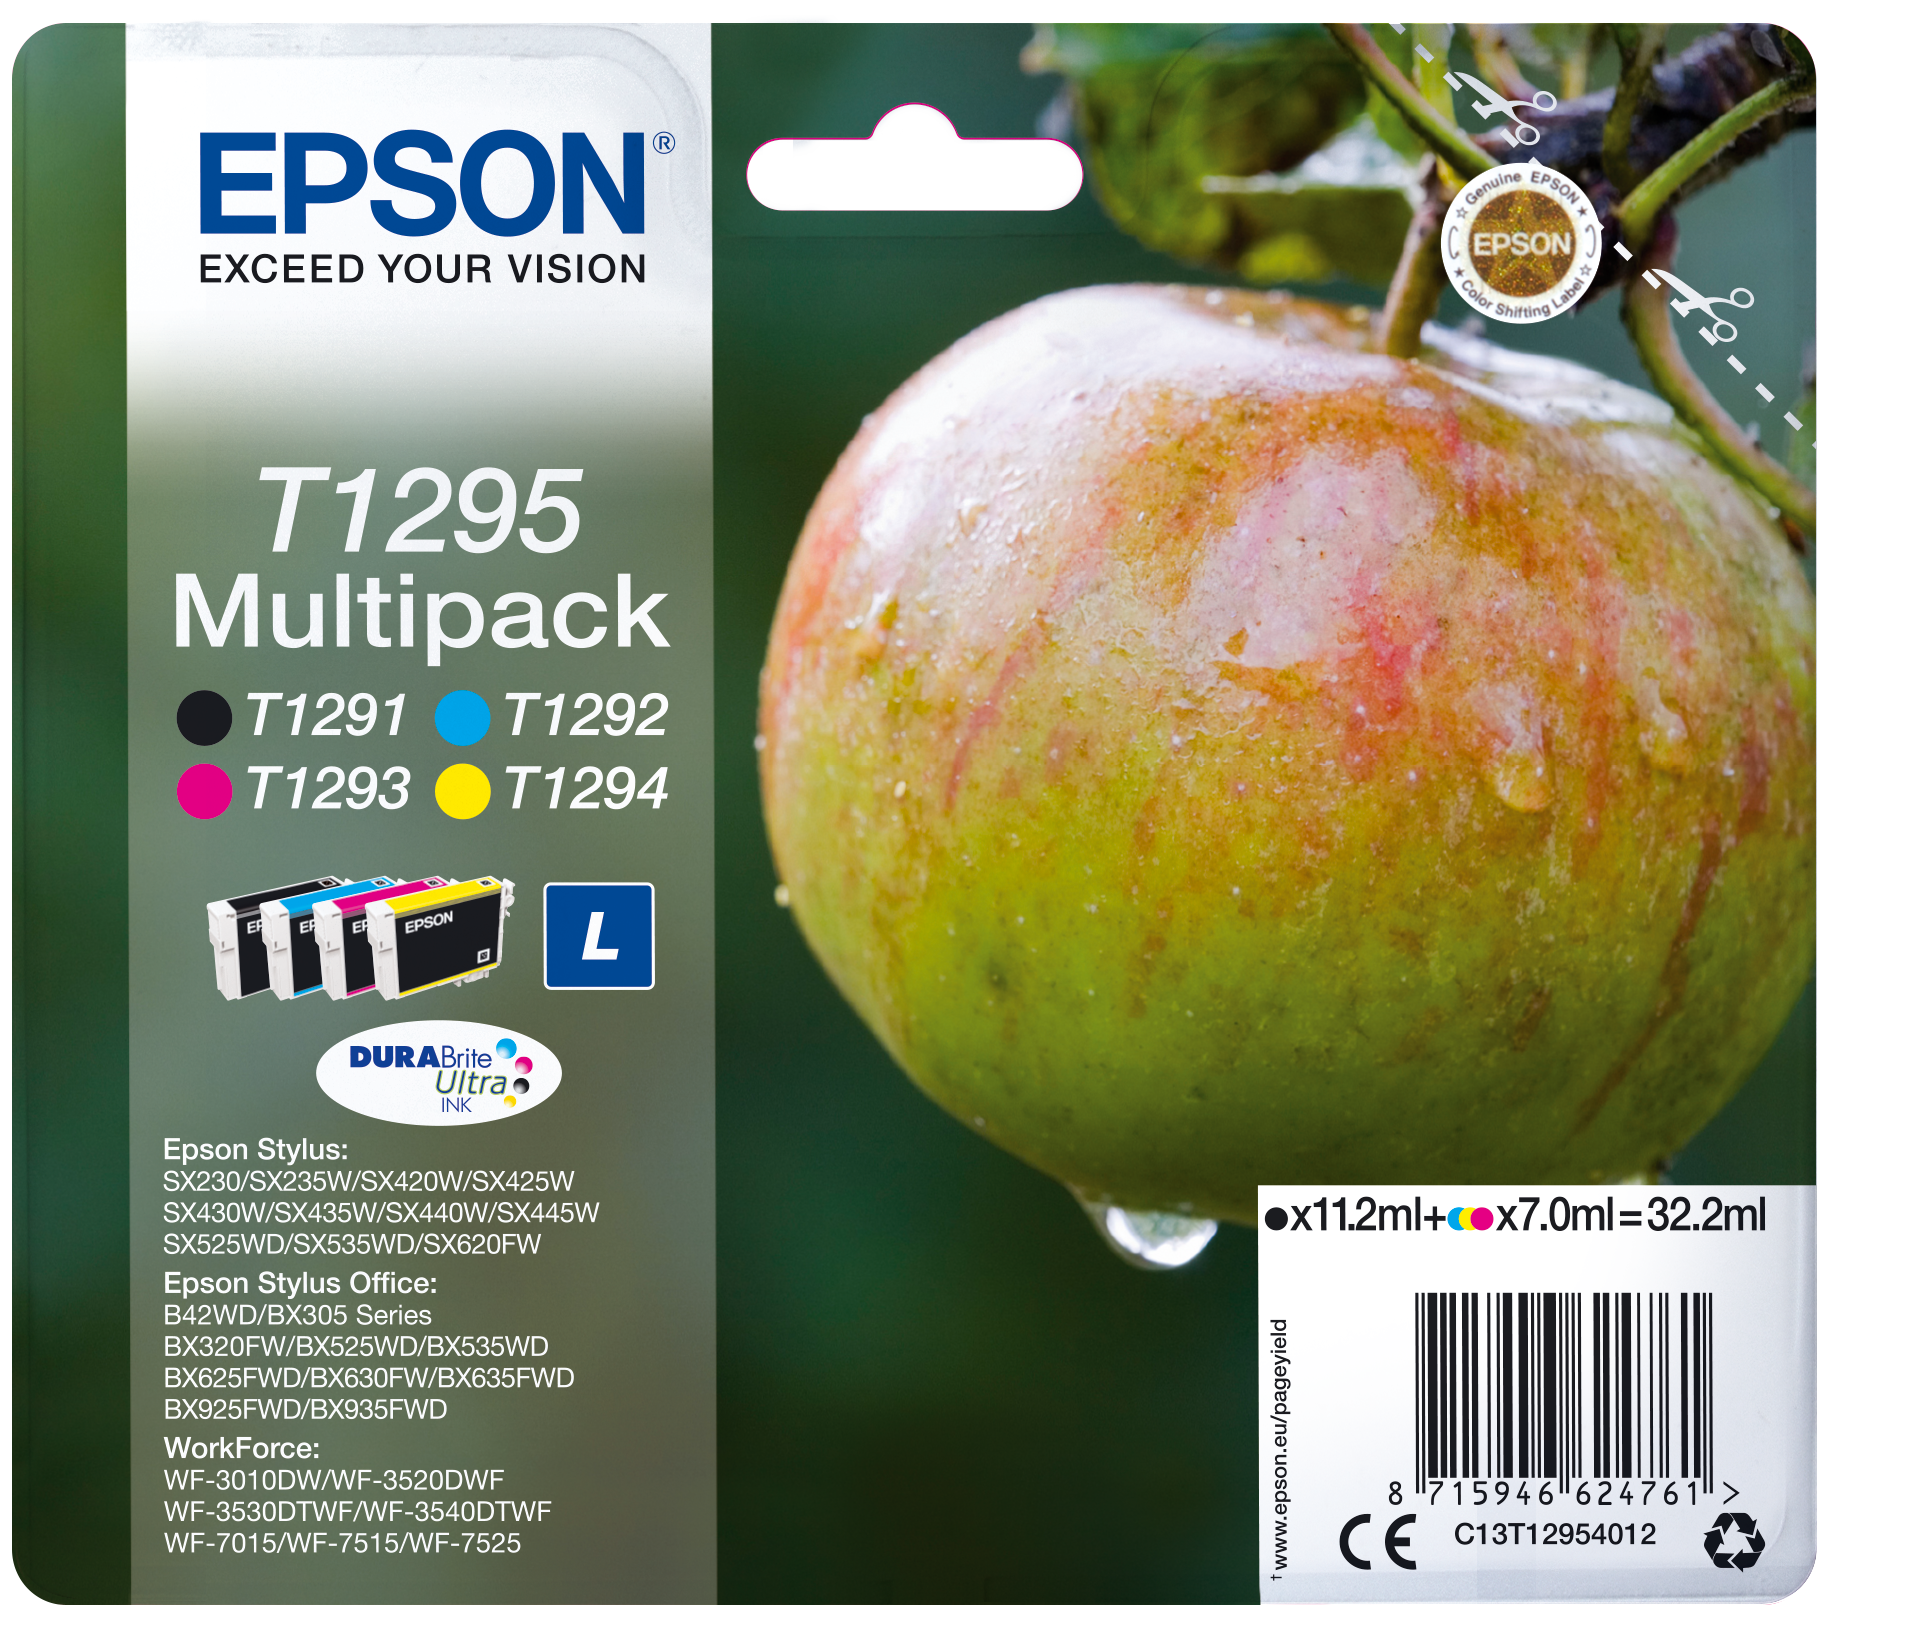 T1295 Ink Cartridges Replacement For Epson T1291 T1292 T1293 T1294  Compatible With Epson Workforce Wf-3520 Wf-3540 Wf-7515